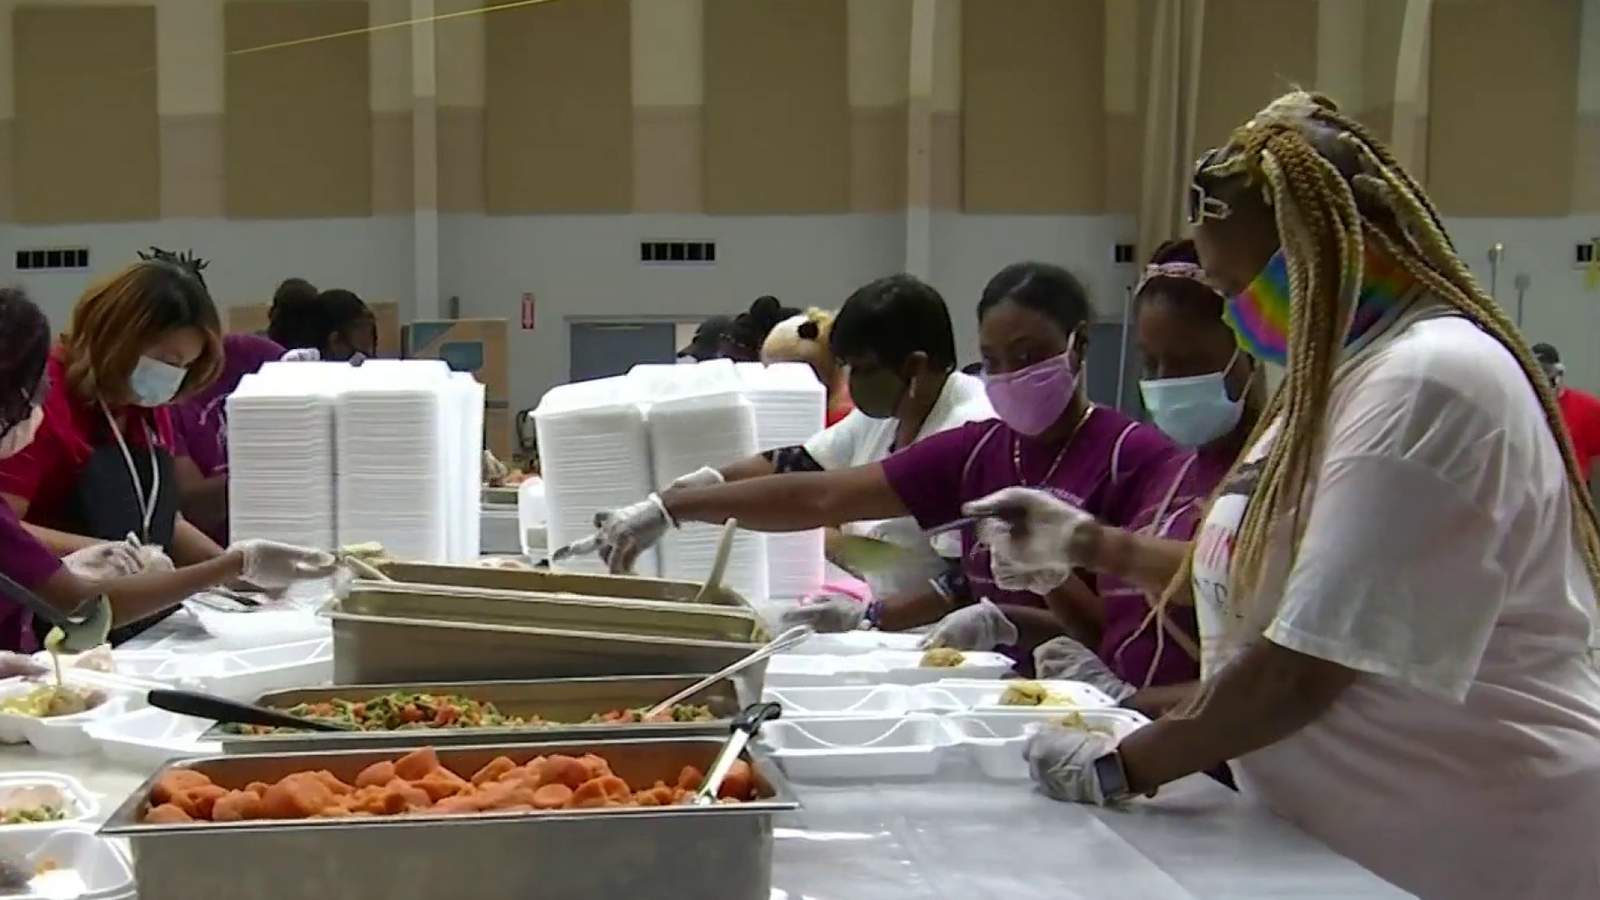 Salvation Army serves thousands of free Thanksgiving meals to Central Florida families